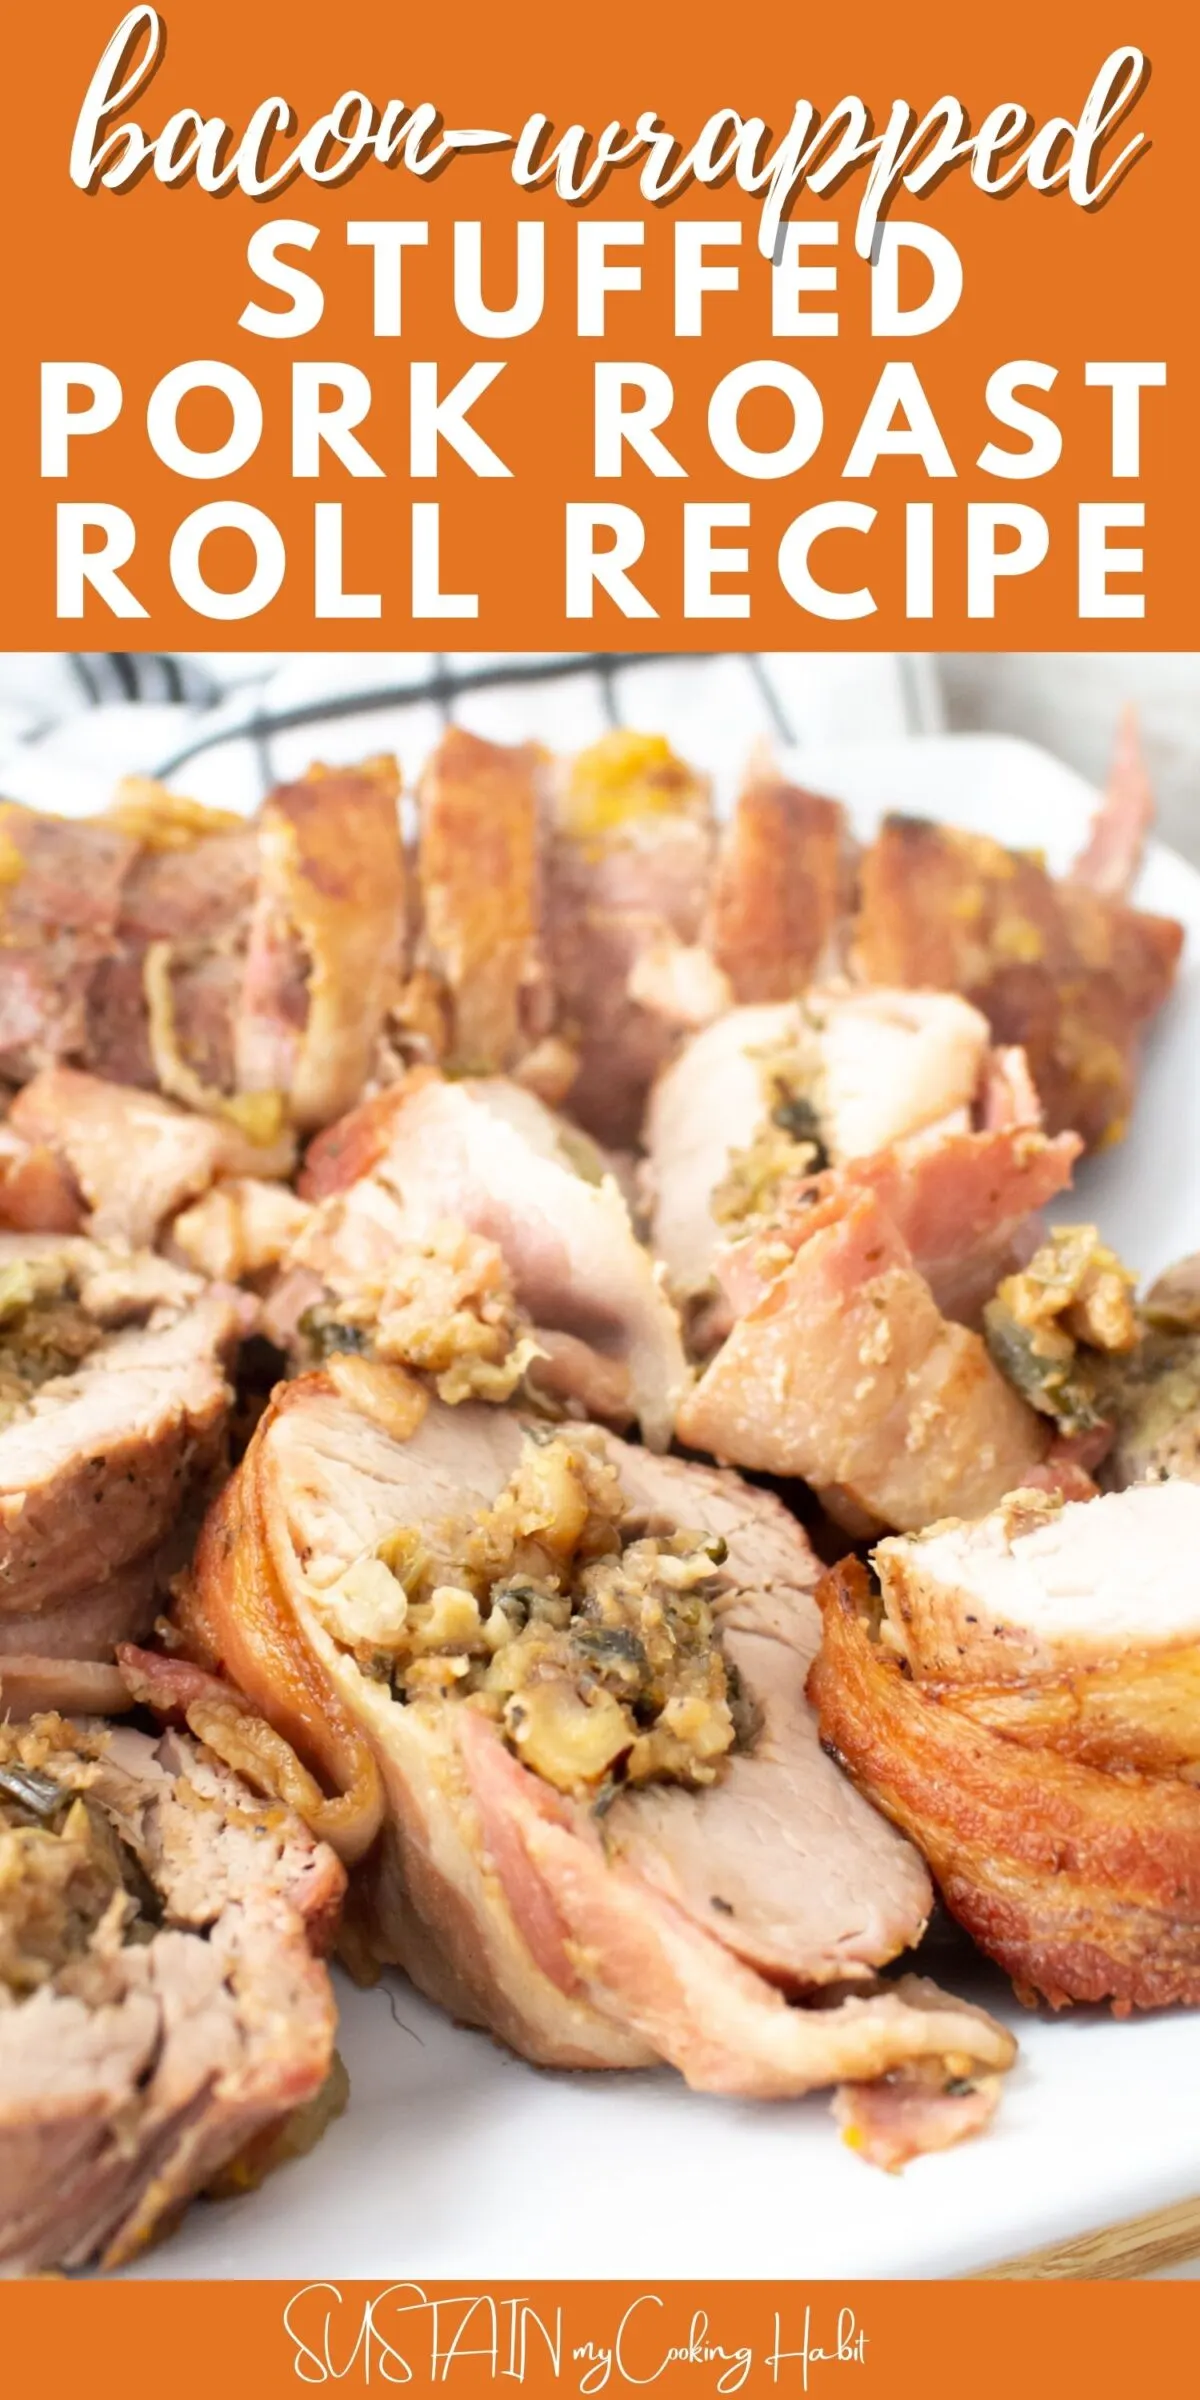 Close up of bacon wrapped stuffed pork roast pieces with text overlay.